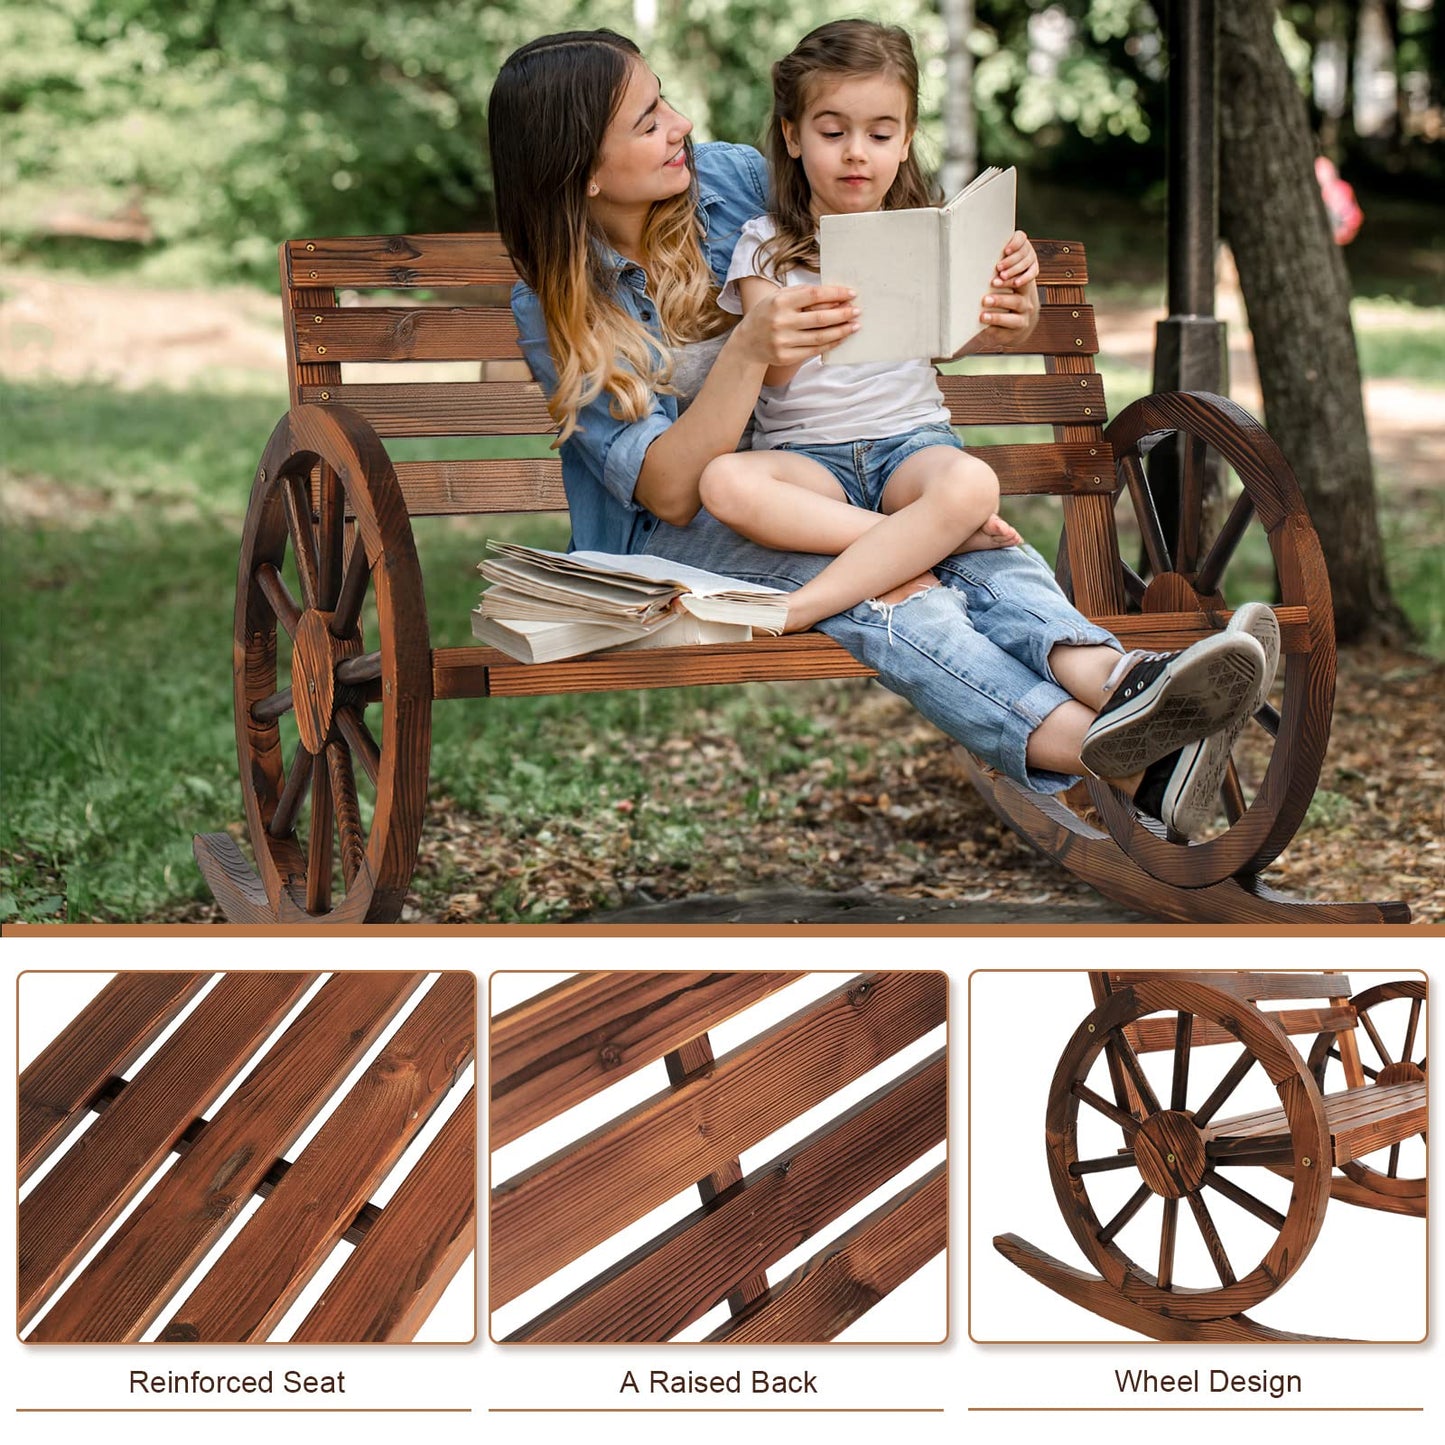 Outdoor Wood Rocking Chair Wooden Wagon Wheel Bench, Rustic Patio Rocker Chair for Porch Lawn Garden Balcony Poolside, Brown